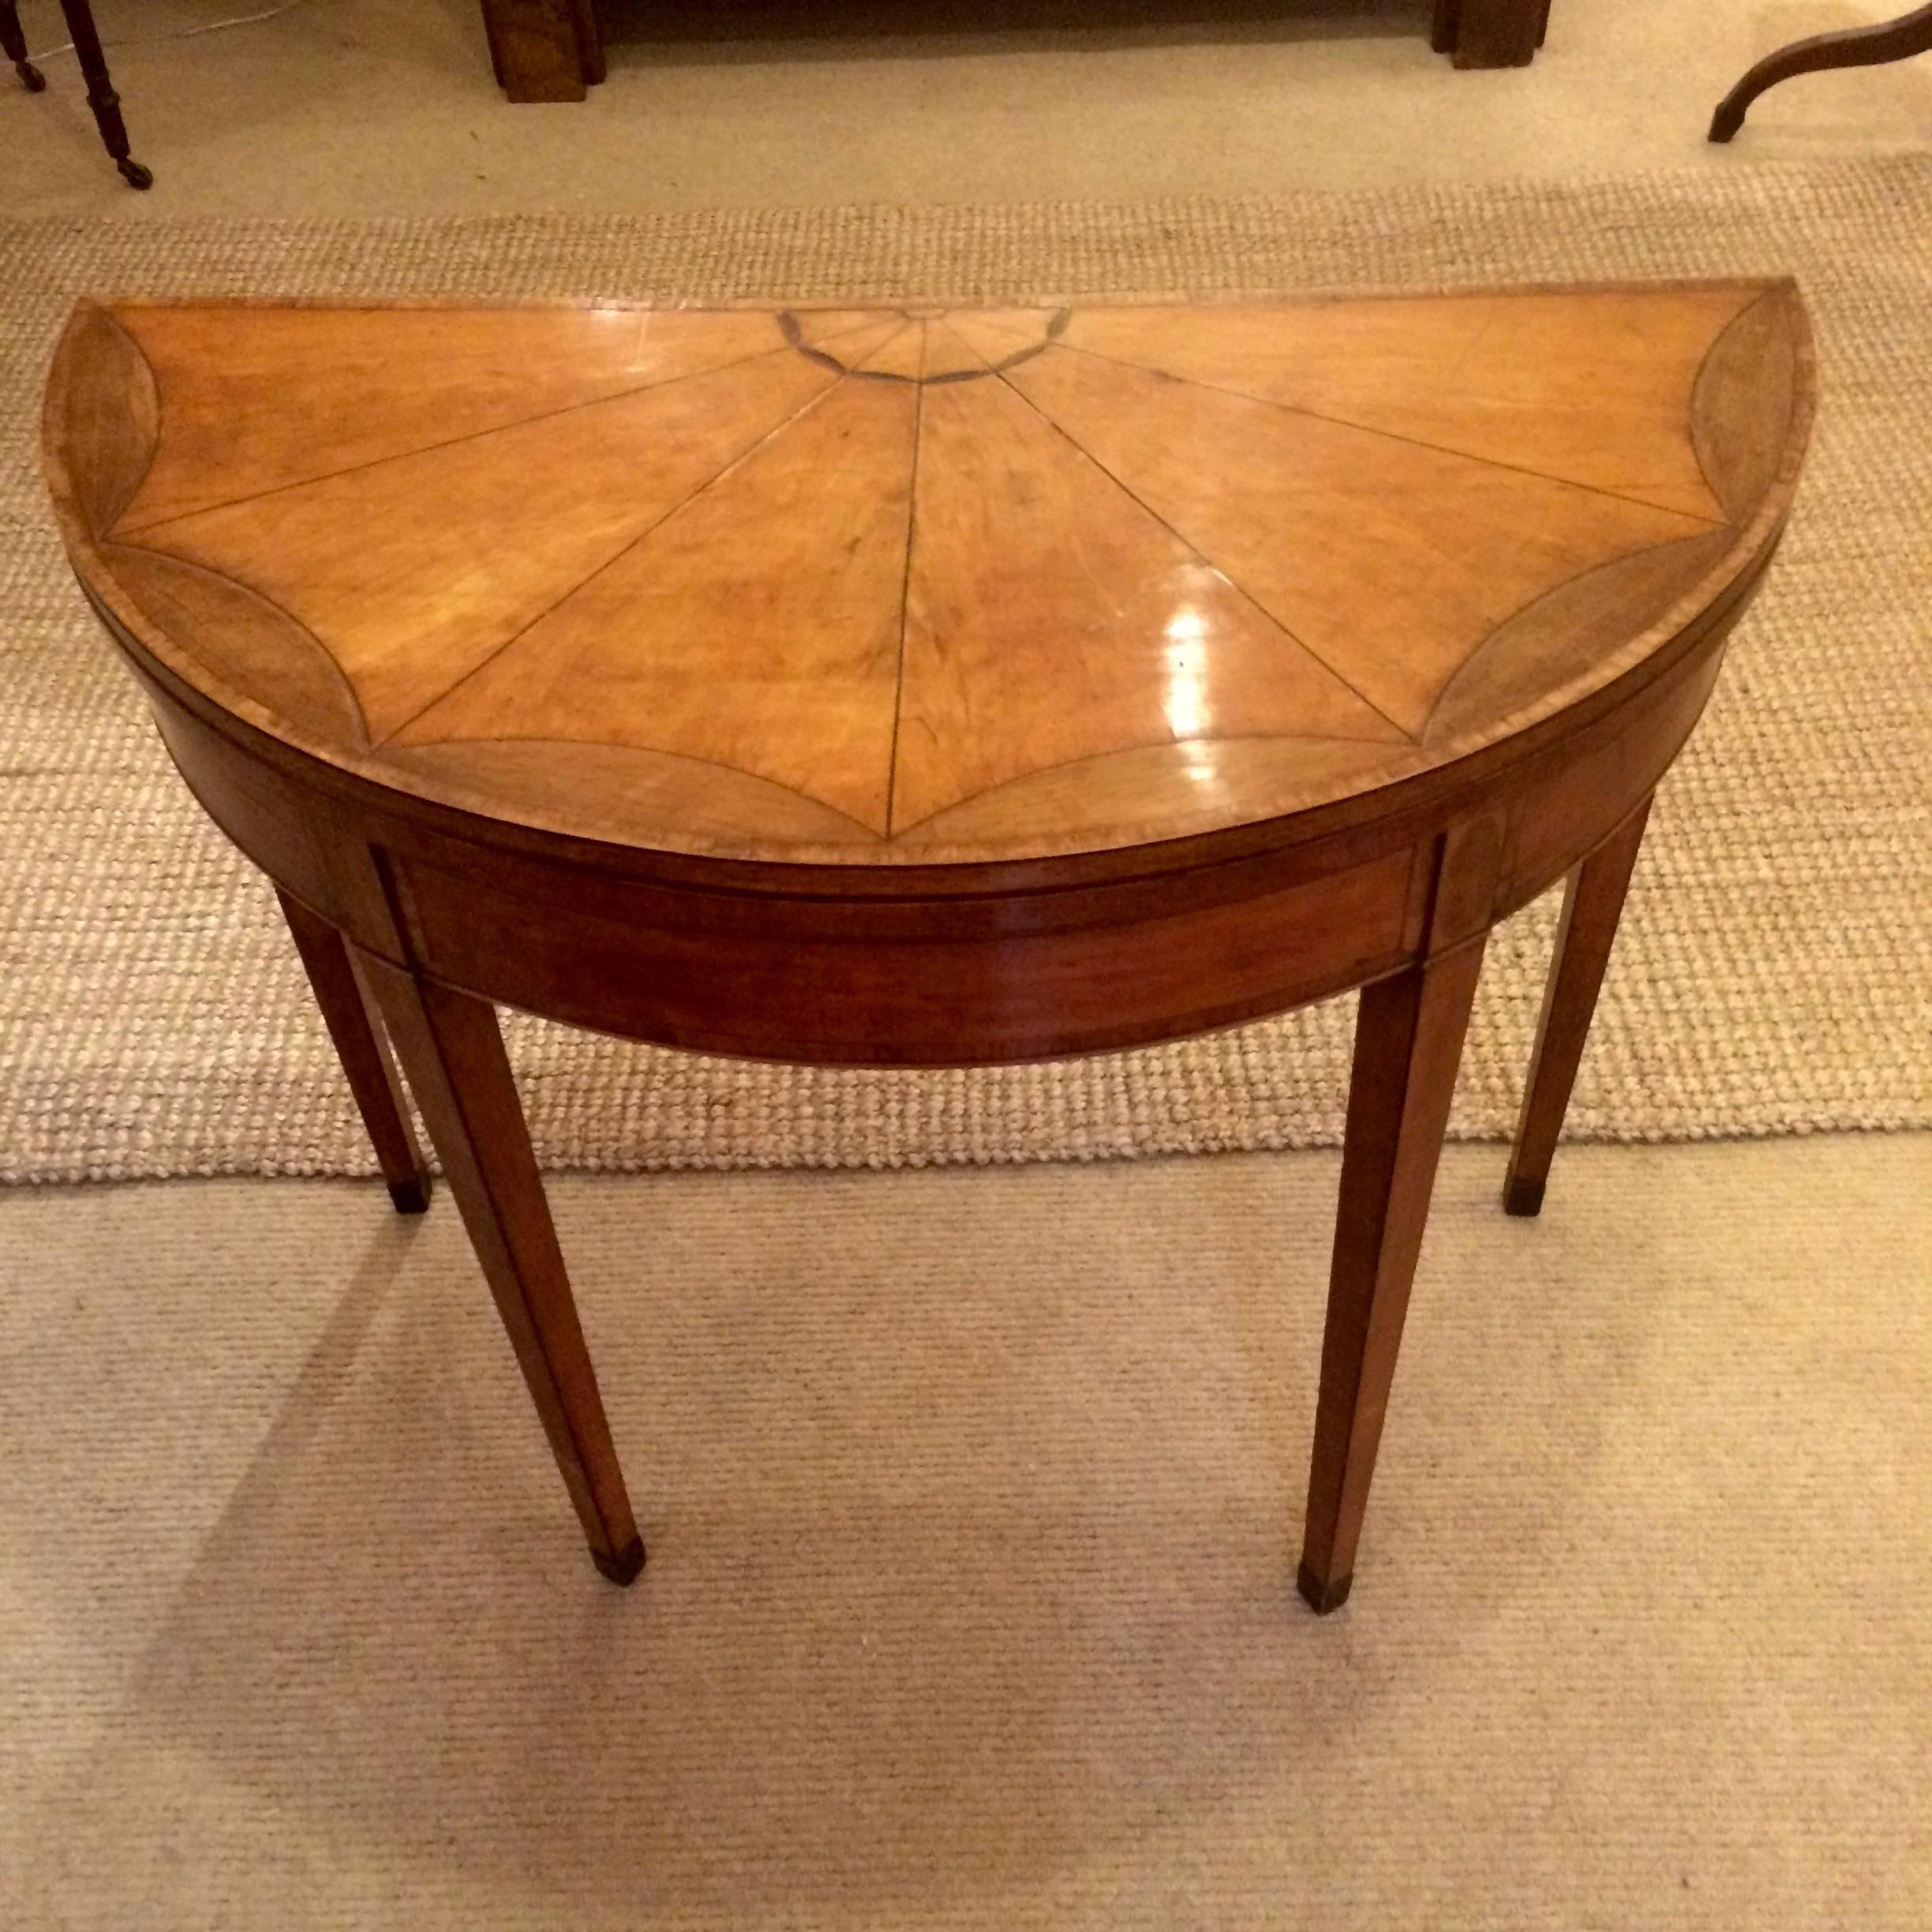 Rare gorgeous demilune game table with honey colored mahogany and satinwood inlay and a wonderful starburst design on top; opens to reveal a pristine camel colored felt top and becomes a round table 36